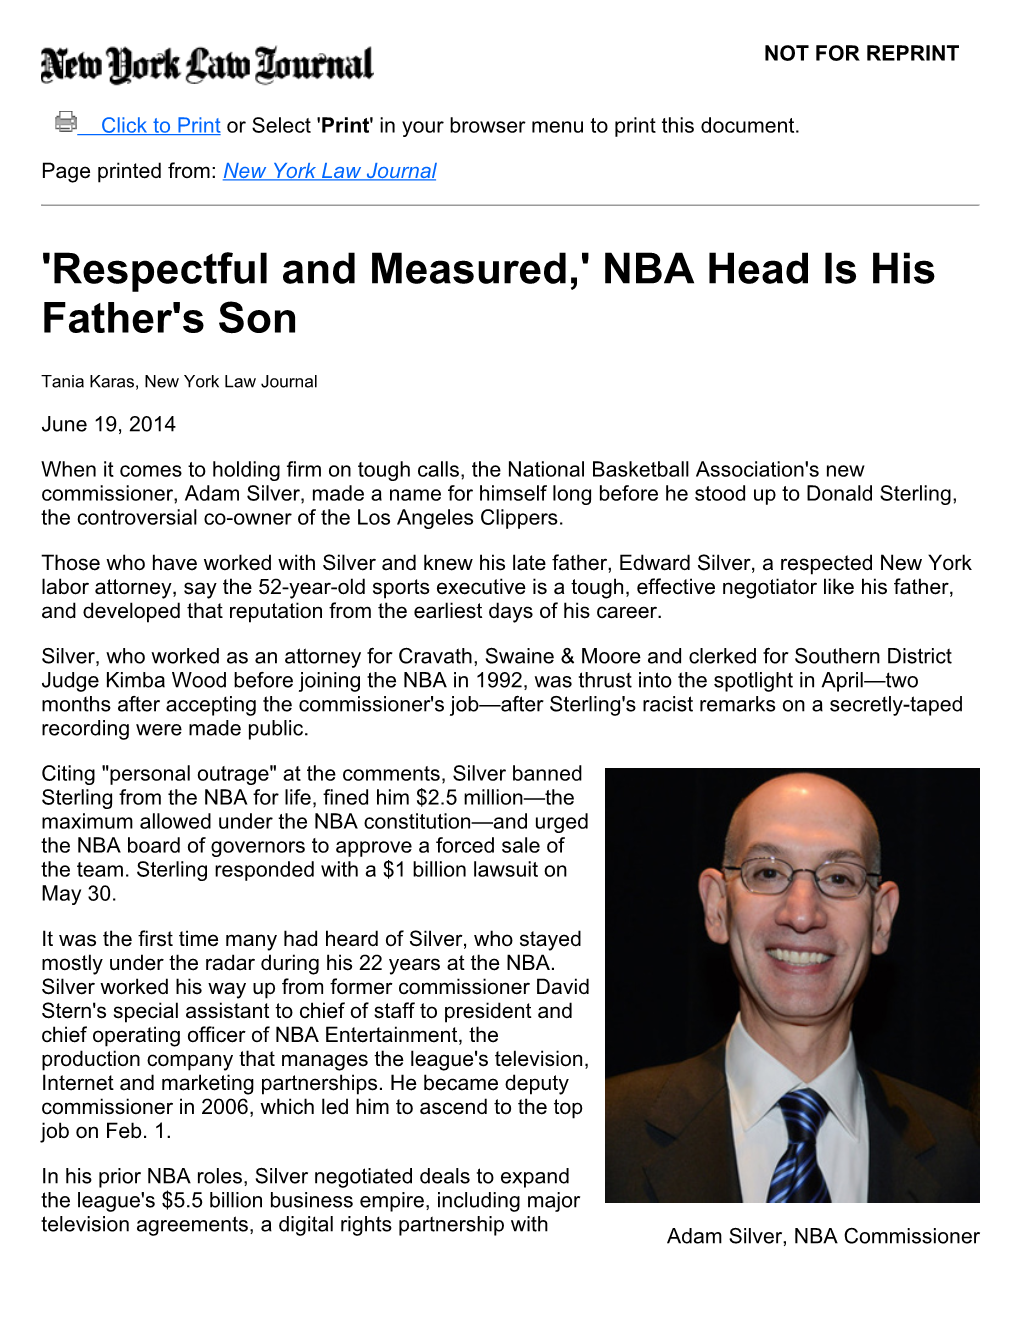 Respectful and Measured NBA Head Is His Father S Son | New York Law